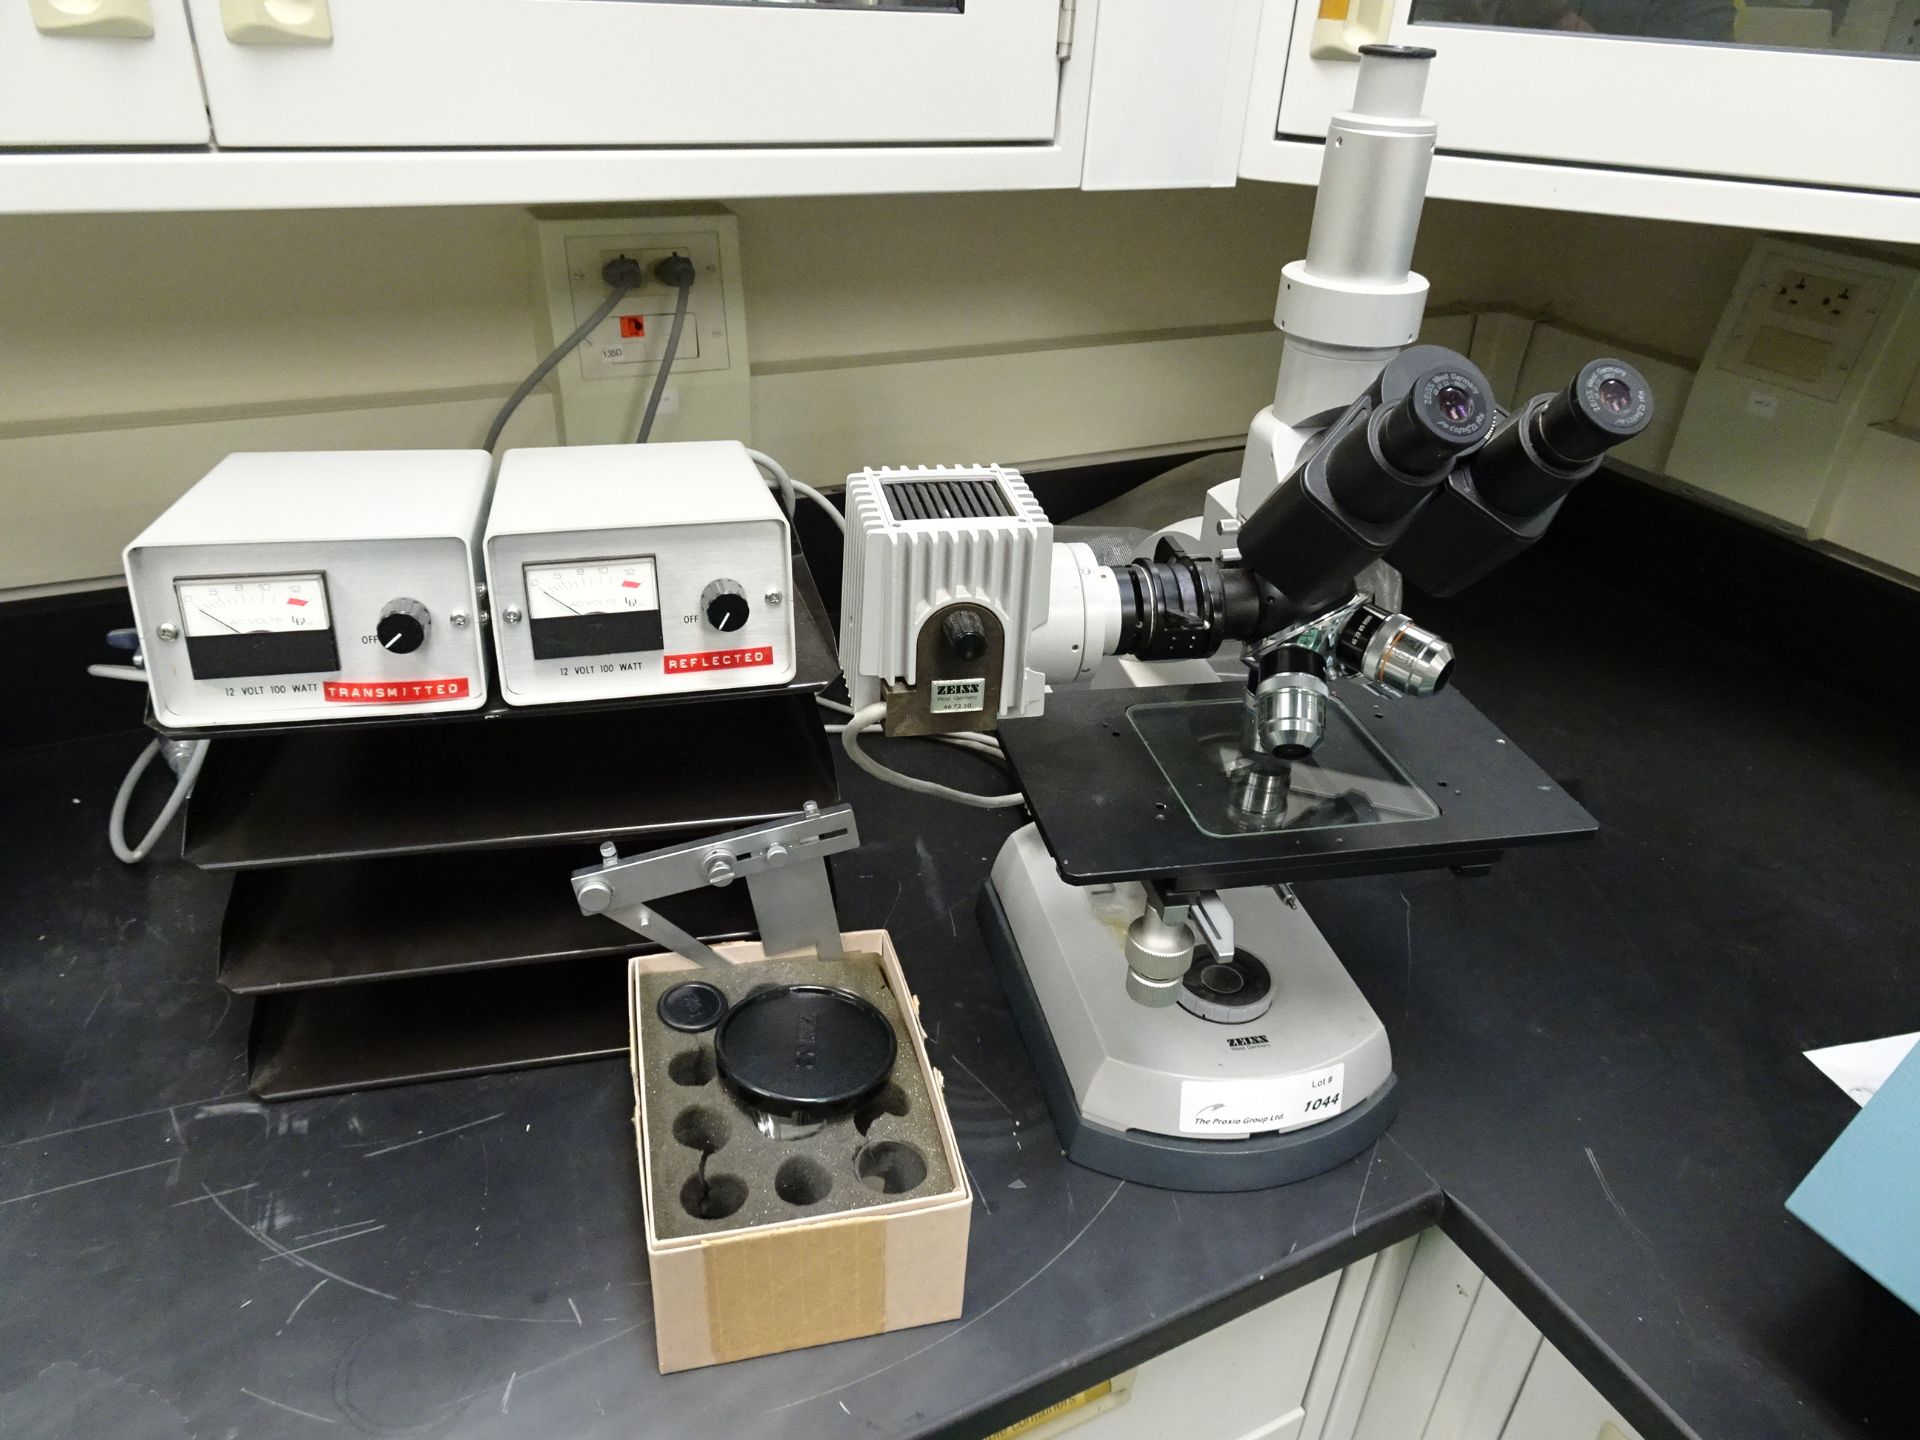 (1) Zeiss Trinoculor Microscope Complete With (2) Zeiss 12.5x Eye Pieces, (1) Epiplan-HD8X/0.2